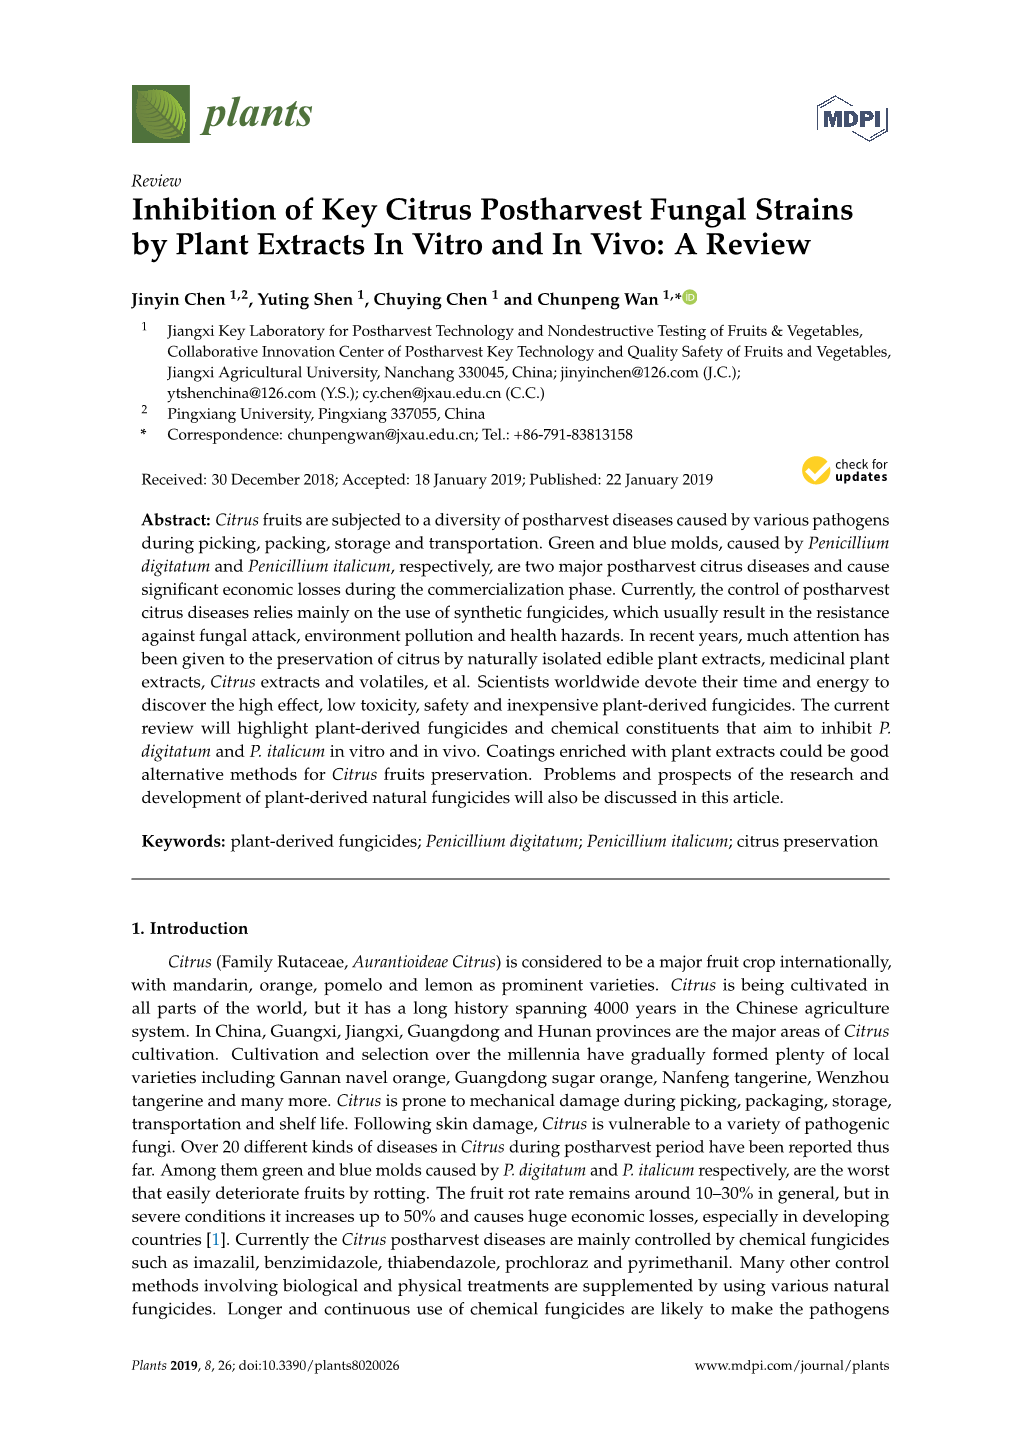 Inhibition of Key Citrus Postharvest Fungal Strains by Plant Extracts in Vitro and in Vivo: a Review